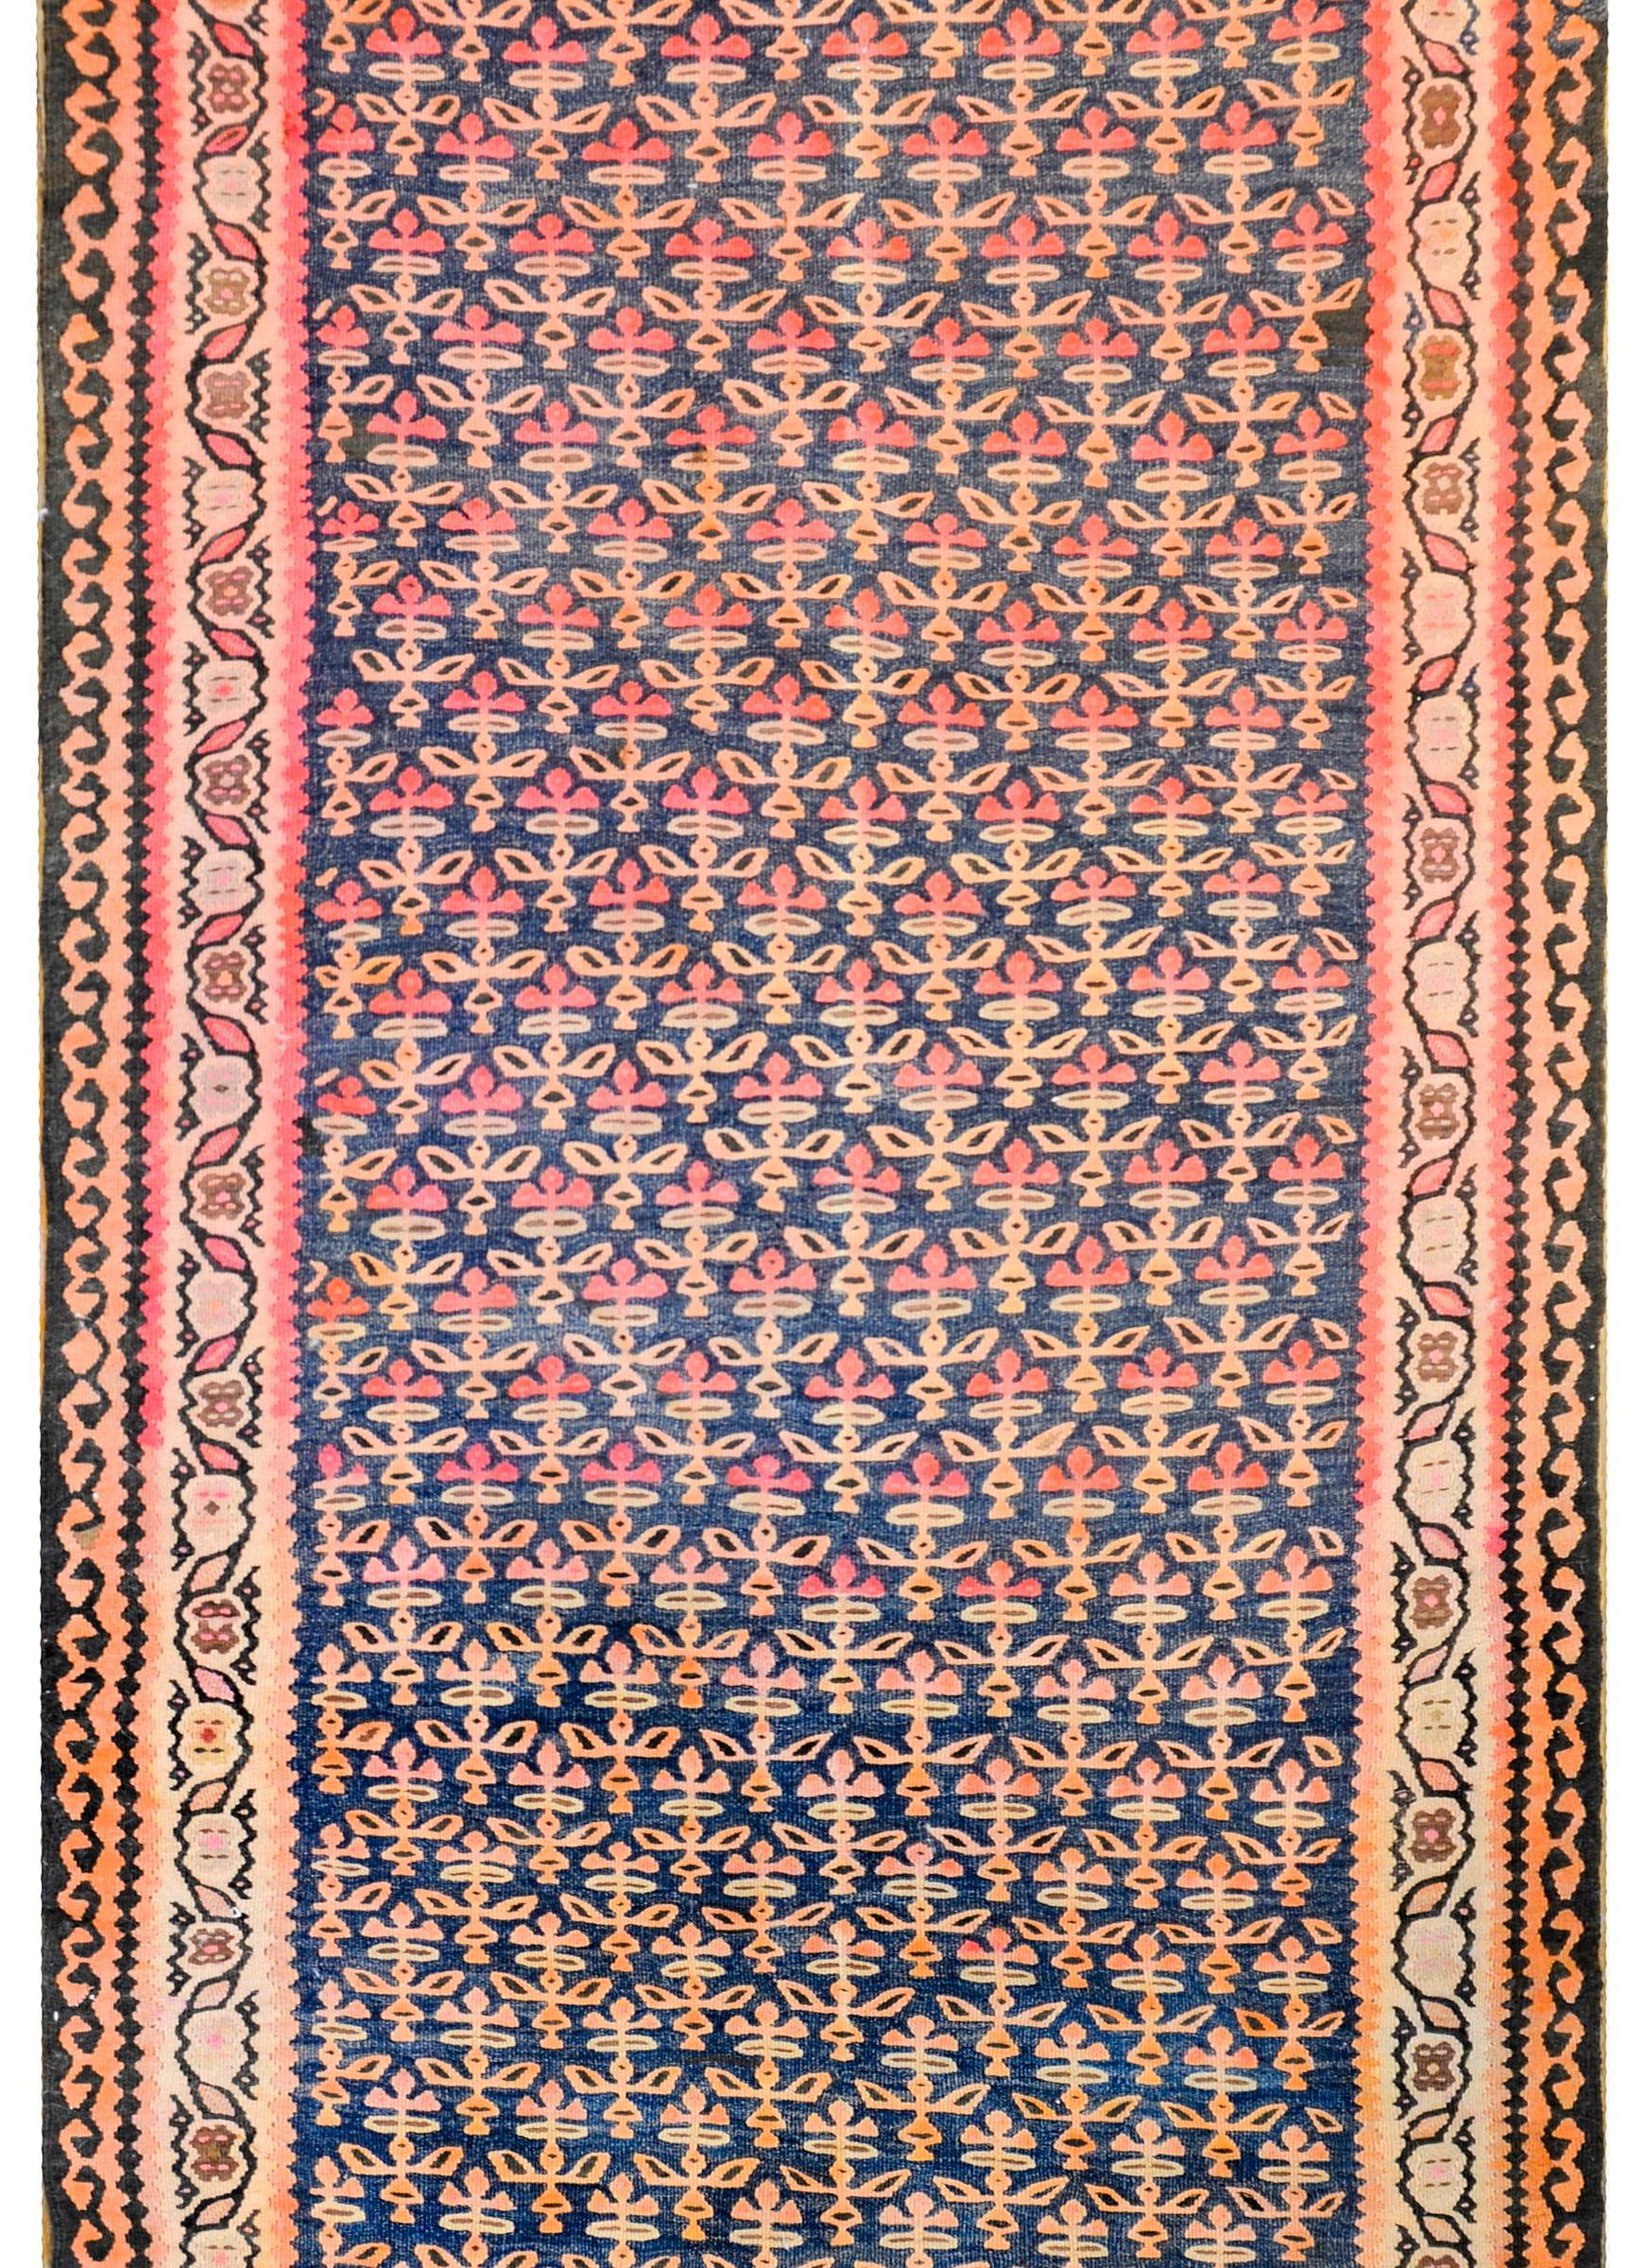 A gorgeous early 20th century Kurdish kilim rug with a beautiful petite tree-of-life pattern woven in gold and crimson, on a dark indigo background. The border is wonderful, with a petite leaf and vine pattern on the inside, and a stylized leaf